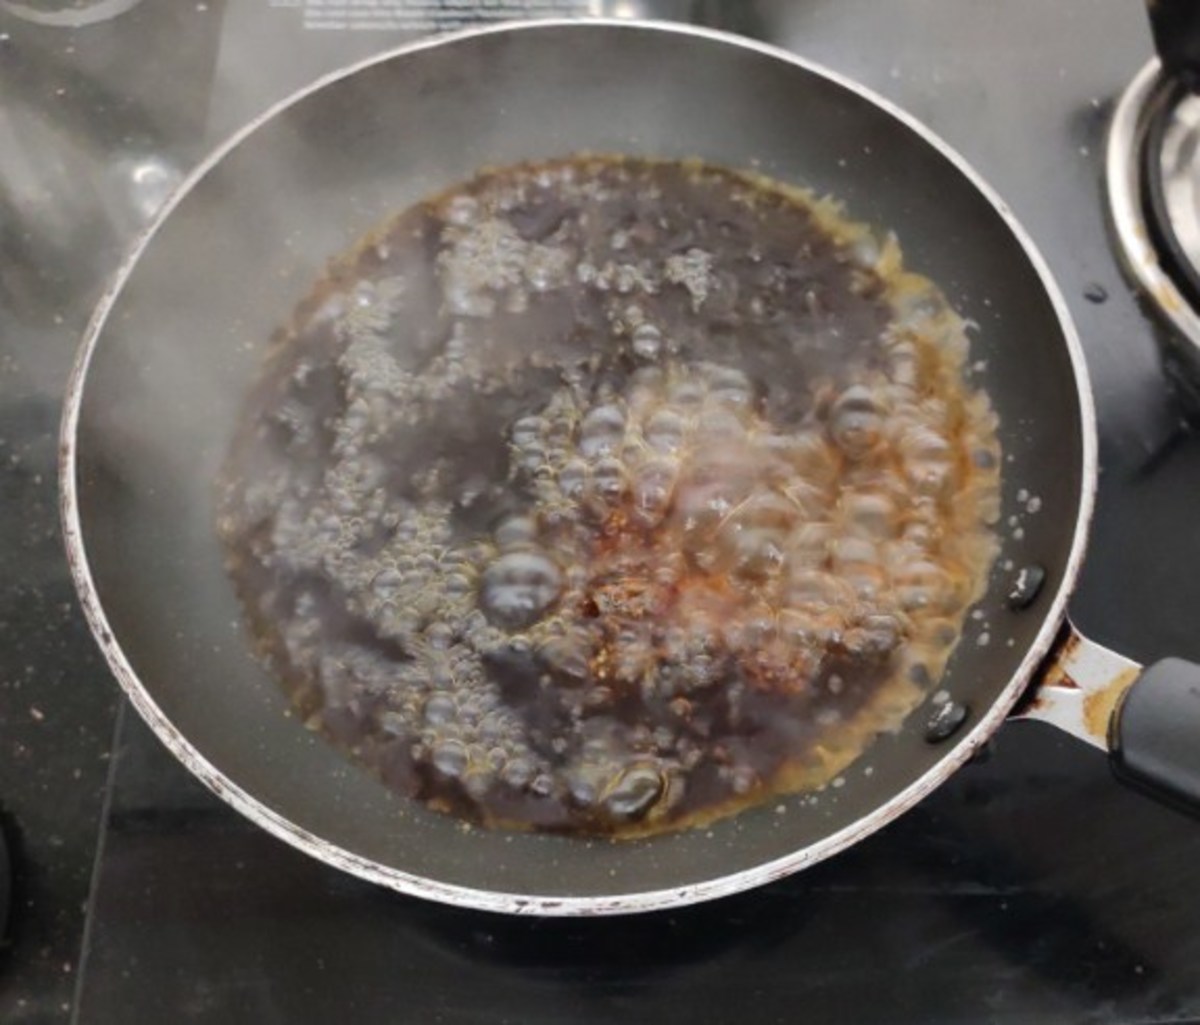 Reaction when hot water is poured into the caramelizing sugar